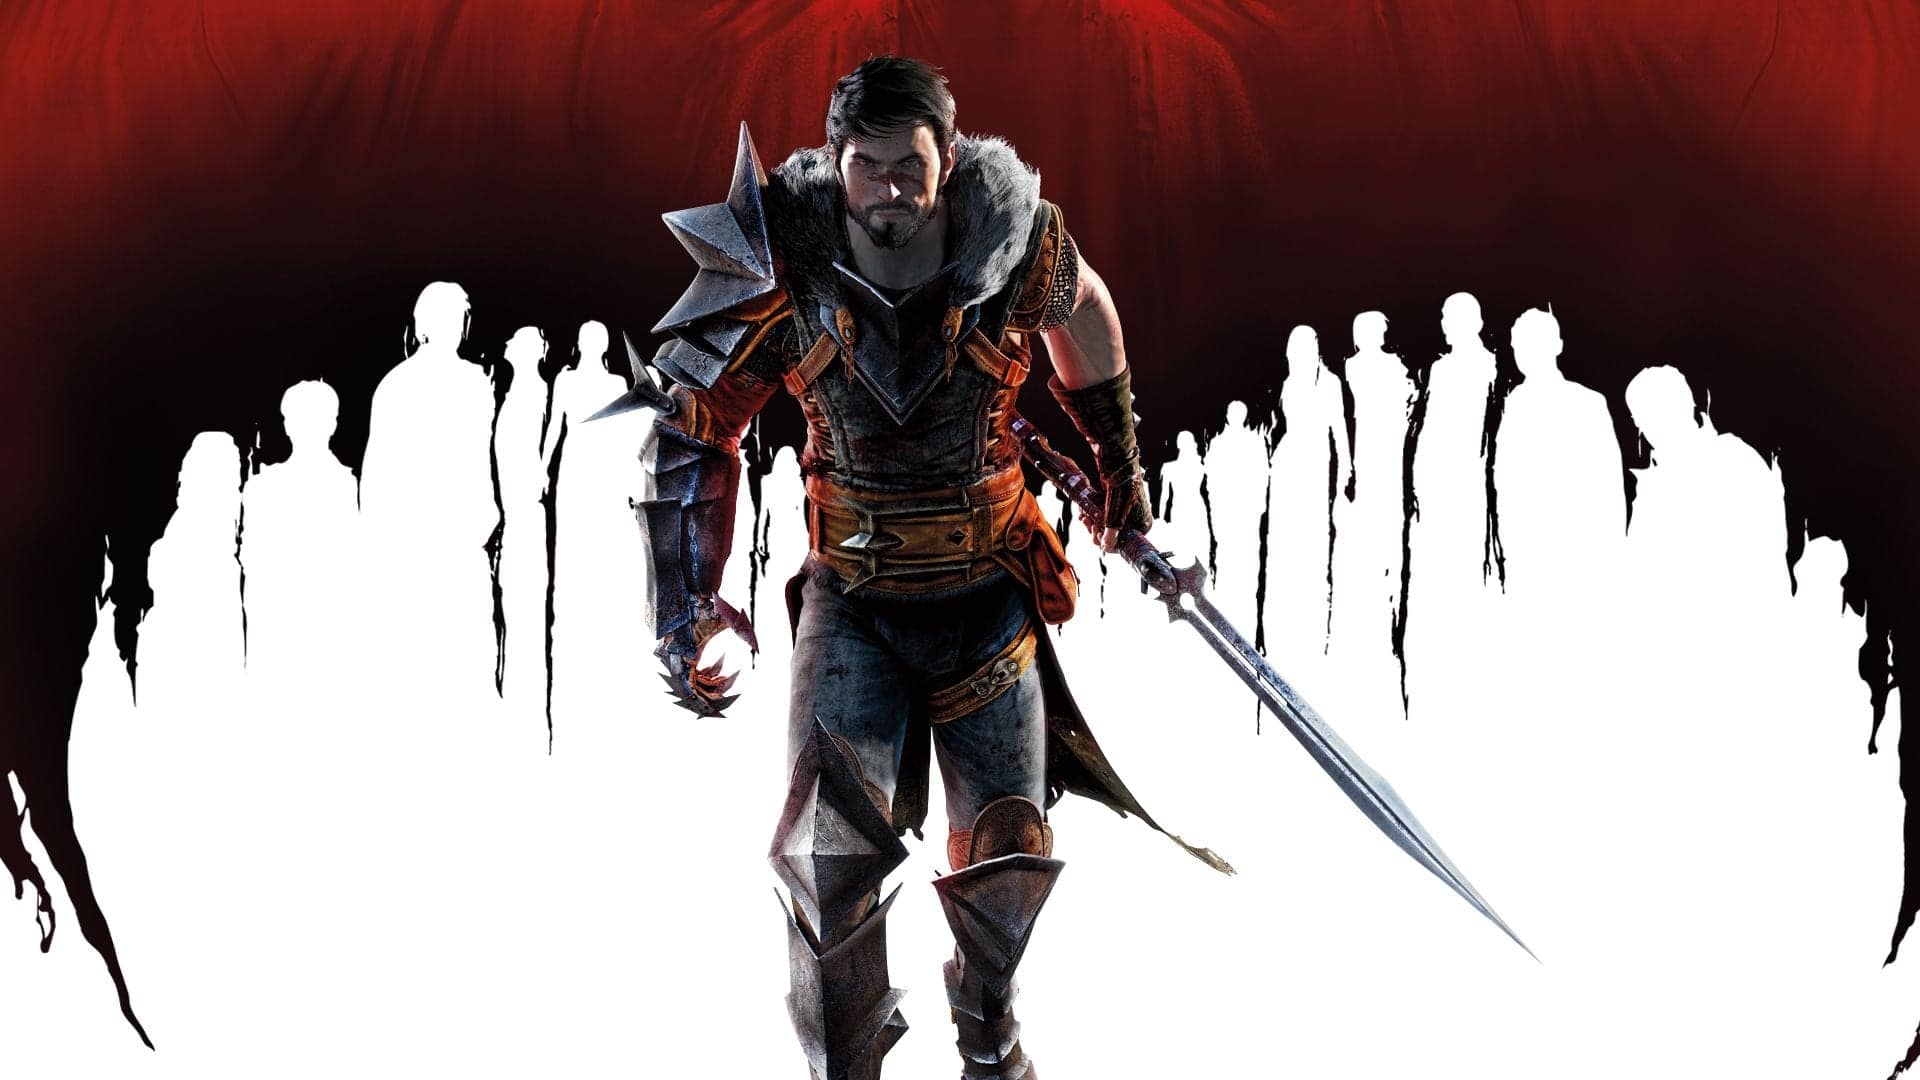 Dragon Age 2 cover featuring Hawke